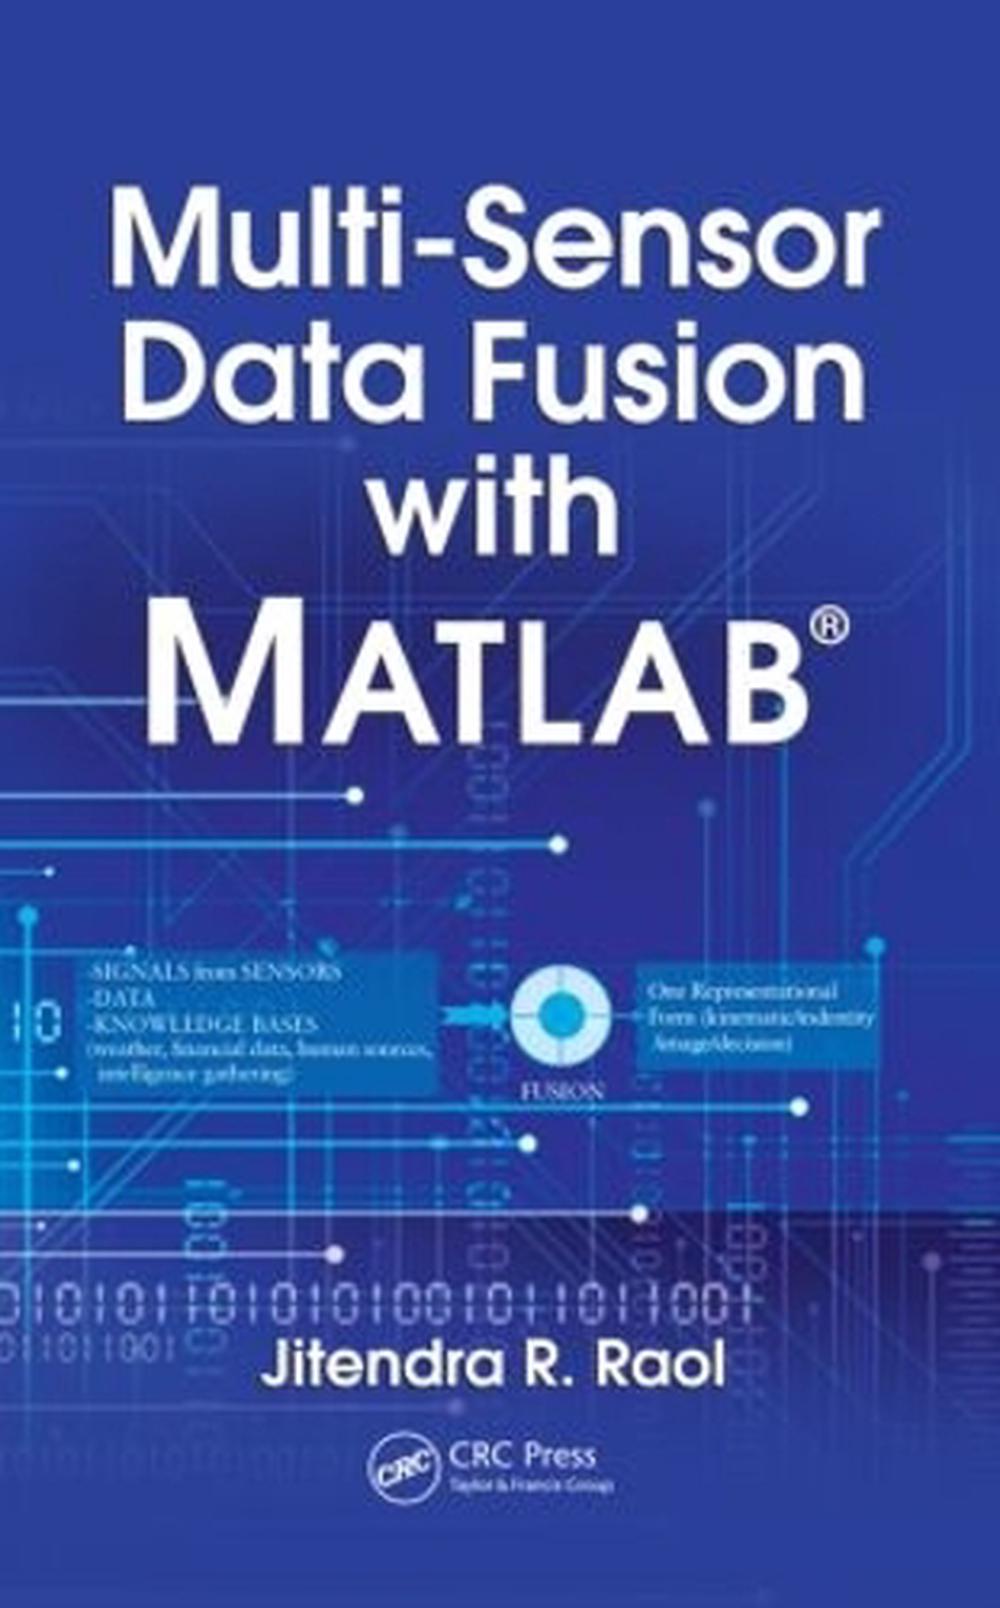 MultiSensor Data Fusion with MATLAB Theory and Practice by Jitendra R. Raol (E 9781439800034